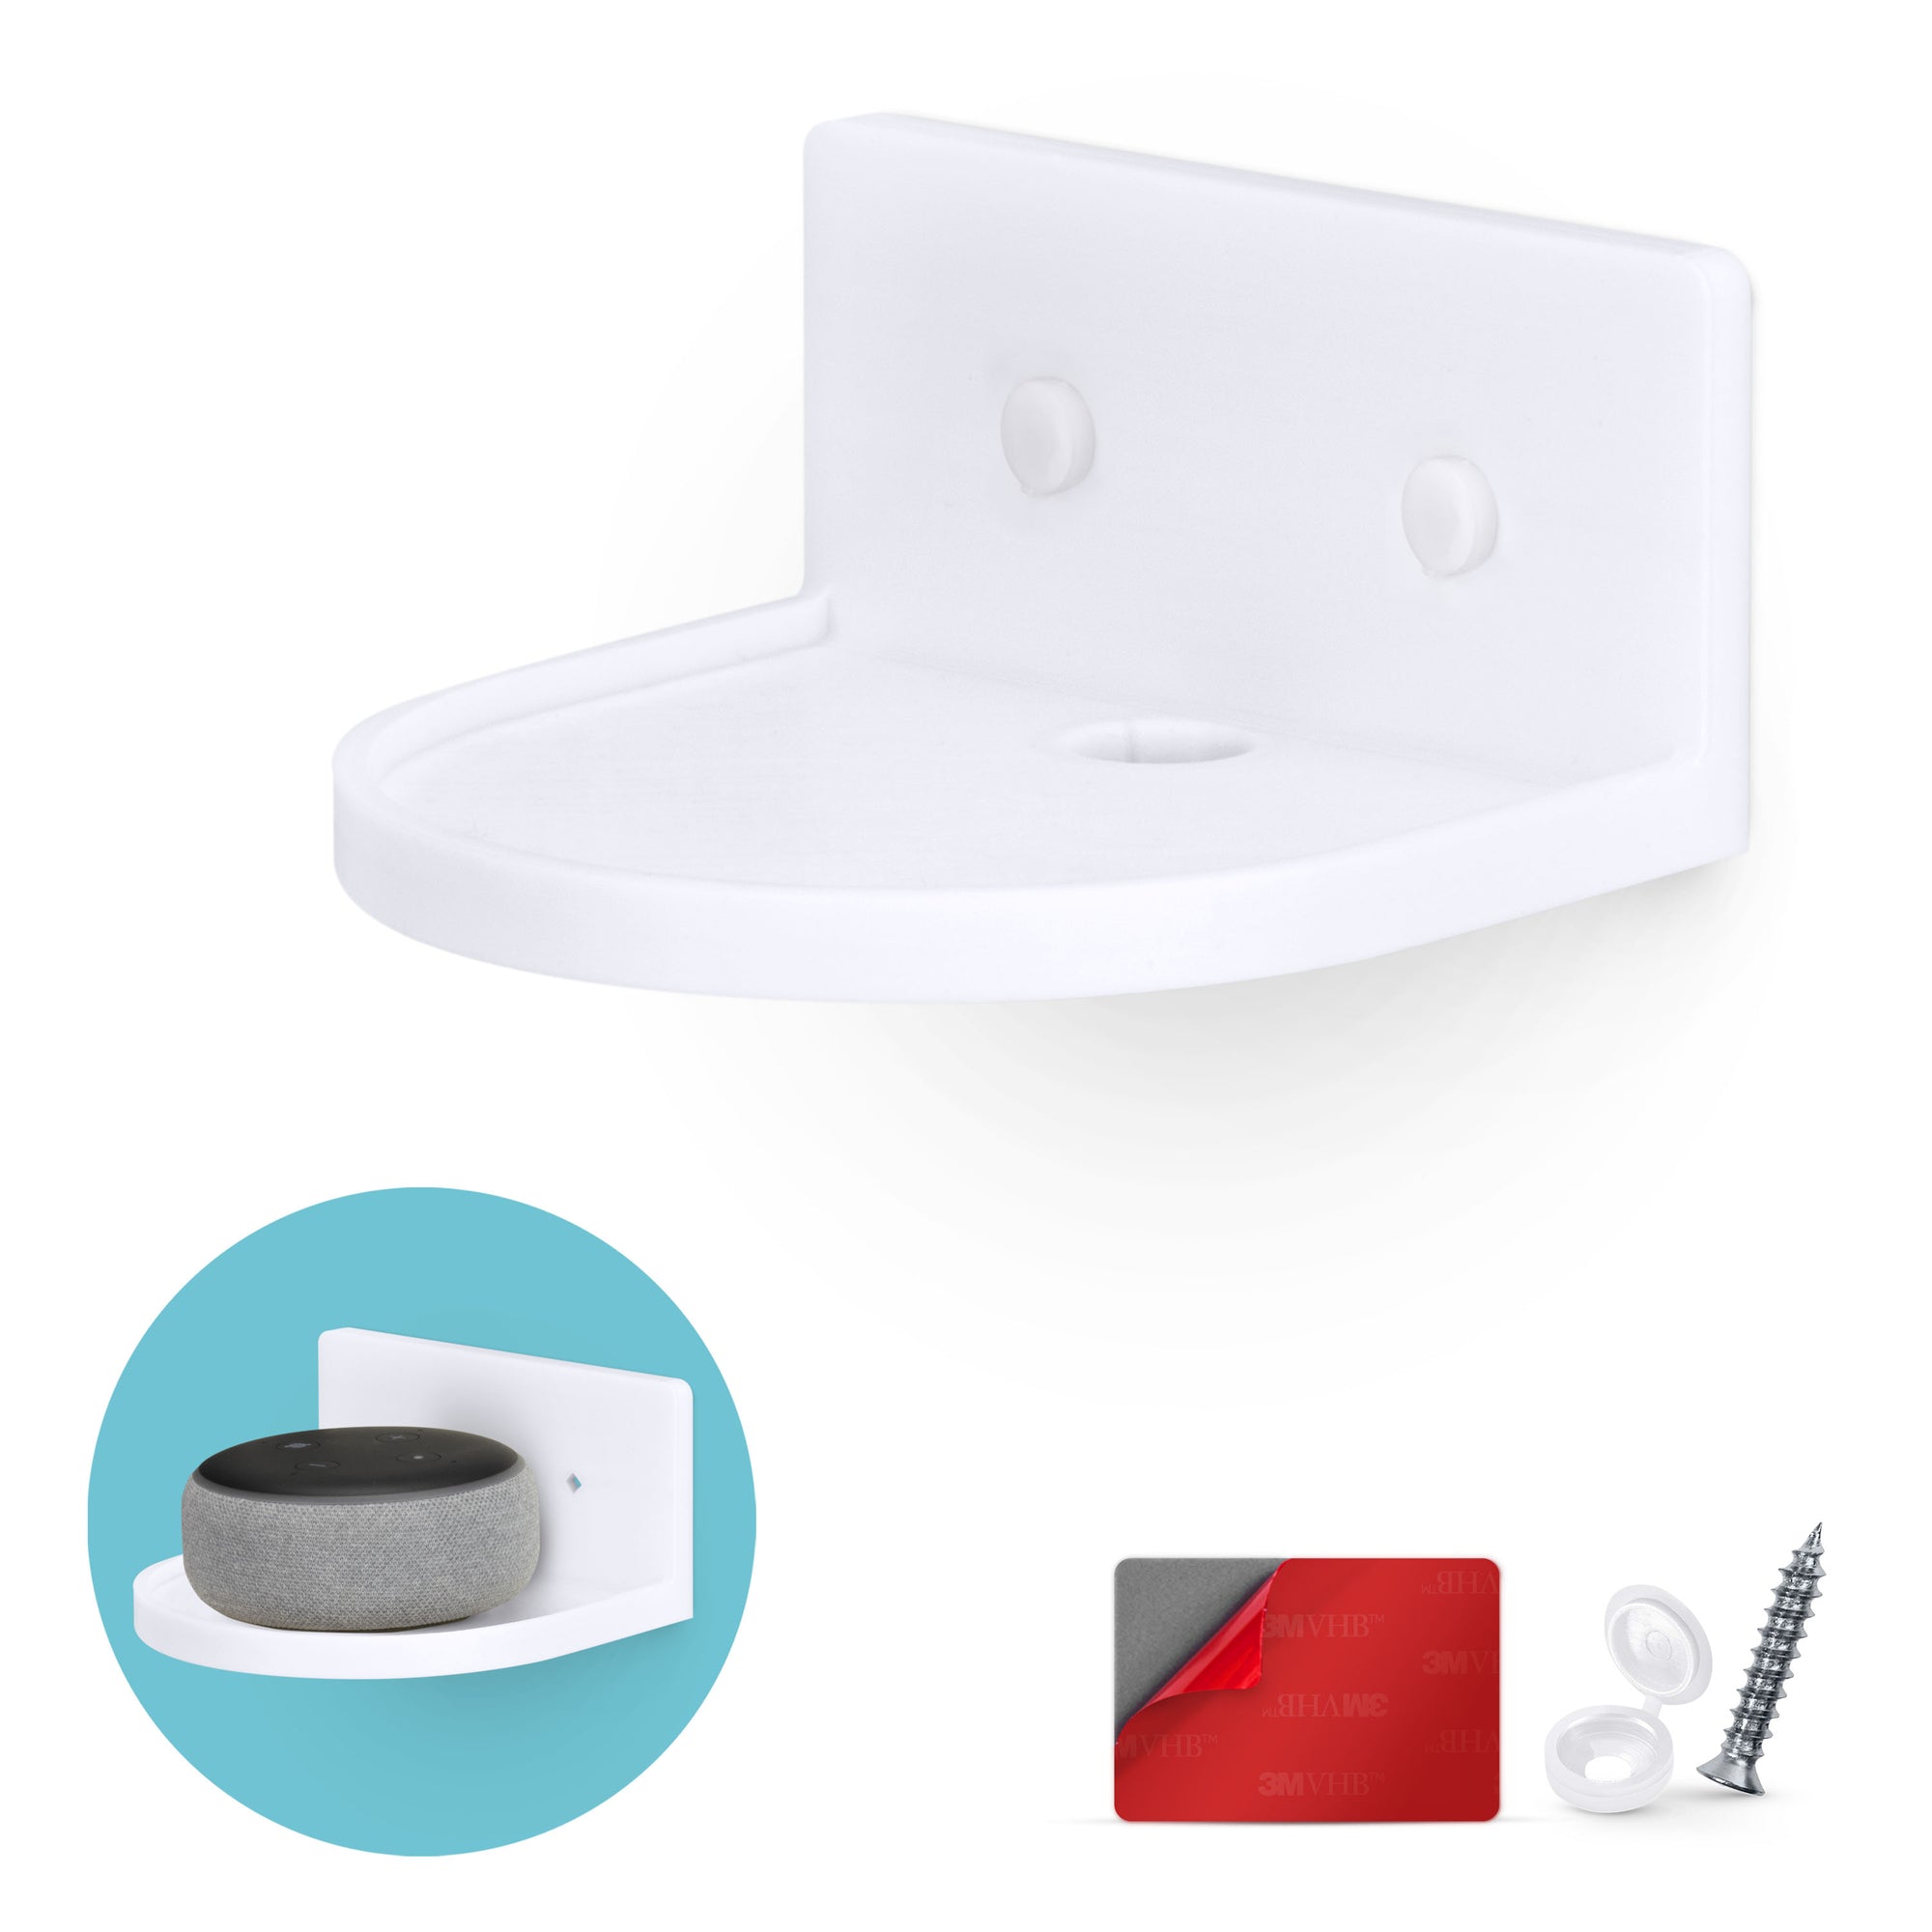 5” Small Floating Shelf, Adhesive & Screw In, For Bluetooth Speakers, Cameras, Plants, Books, Toys & More, Universal Shelves, Easy to Install (SHELF CF2105 White)